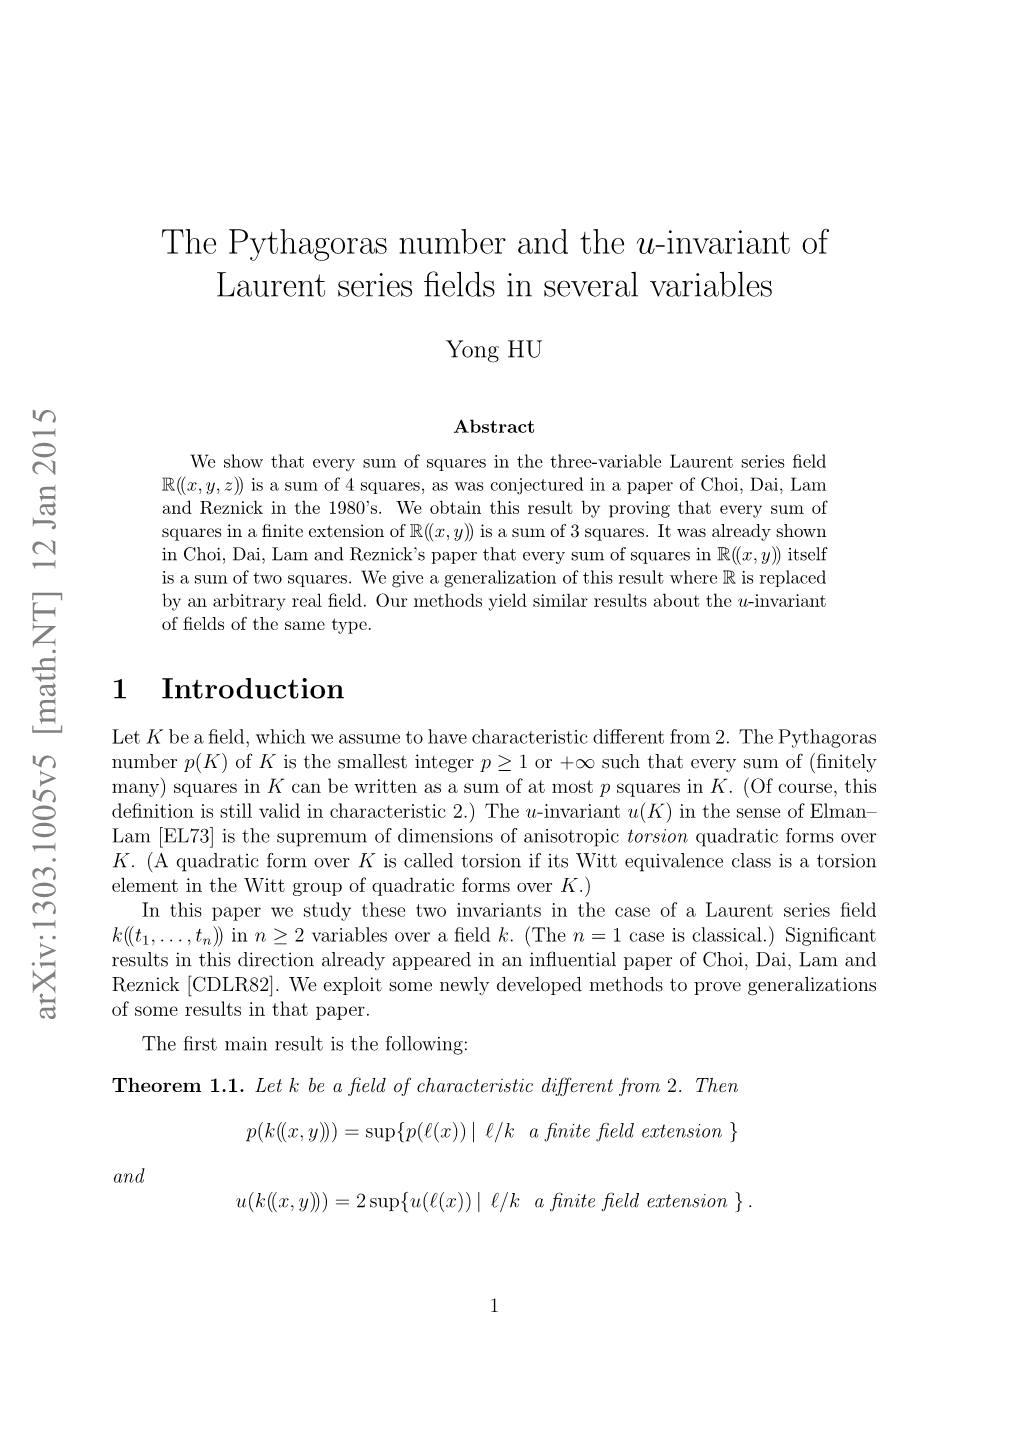 The Pythagoras Number and the $ U $-Invariant of Laurent Series Fields